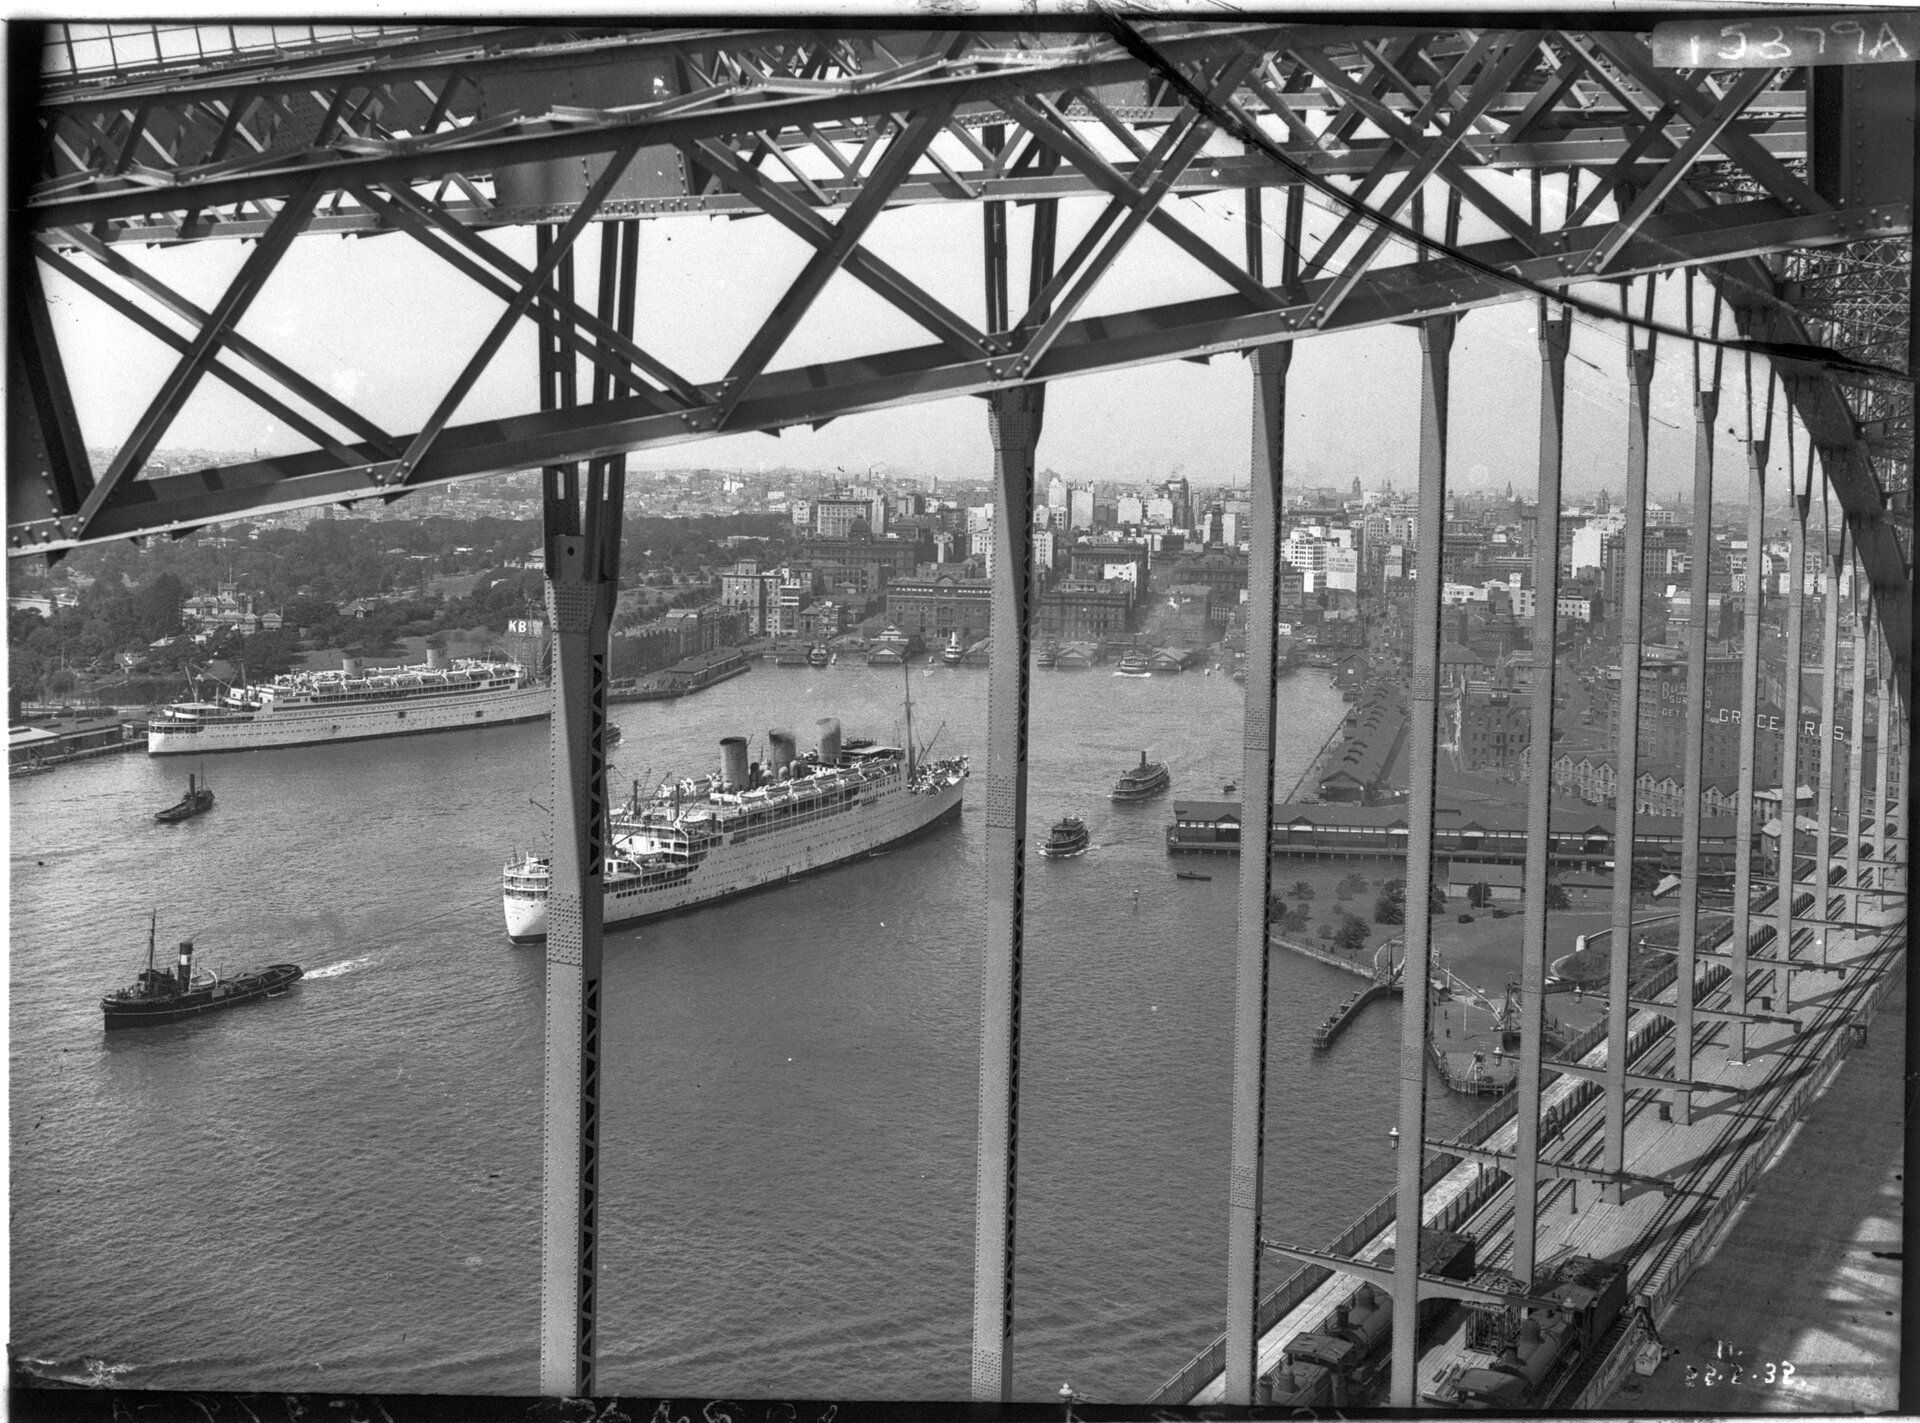 Ocean liners Strathnaver and Mariposa in Sydney Harbour, 1932